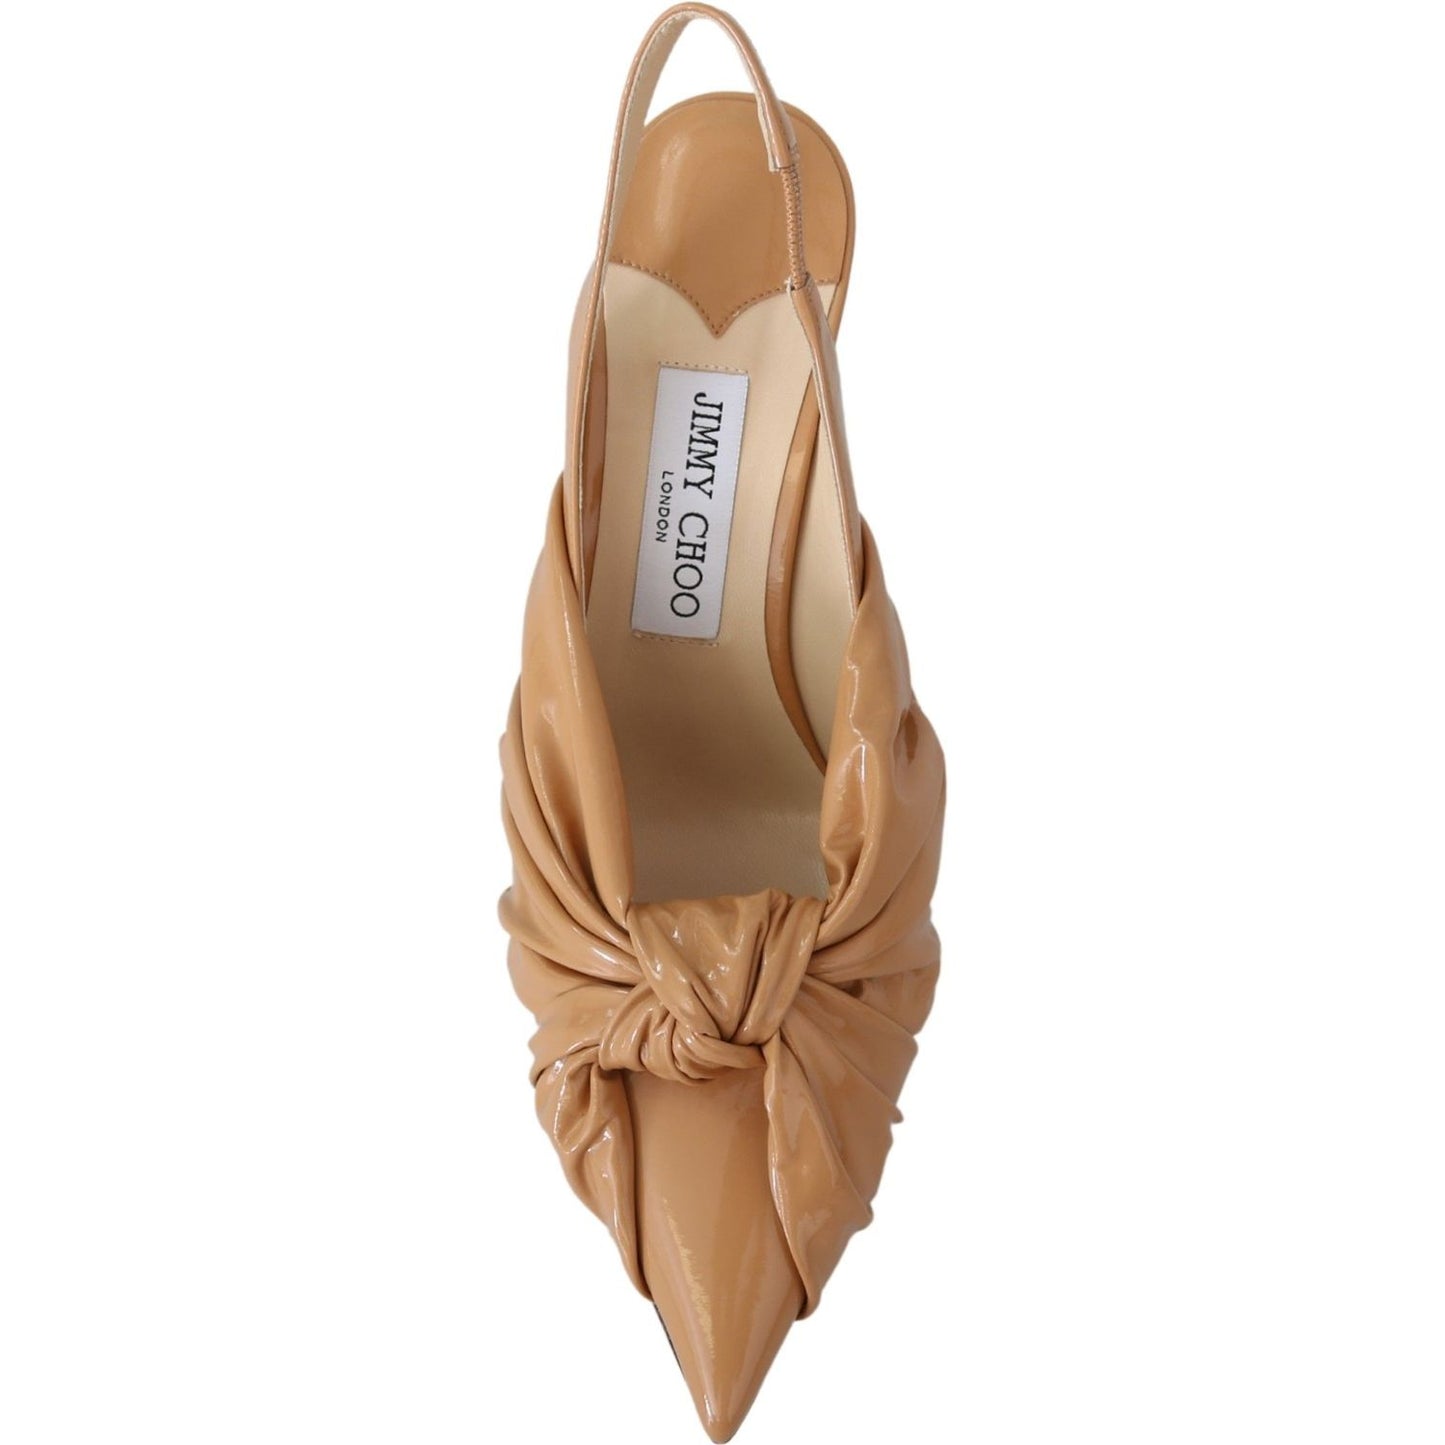 Jimmy Choo Elegant Pointed Toe Leather Pumps annabell-85-caramel-leather-pumps Shoes IMG_2755-a1b3e8d9-816.jpg